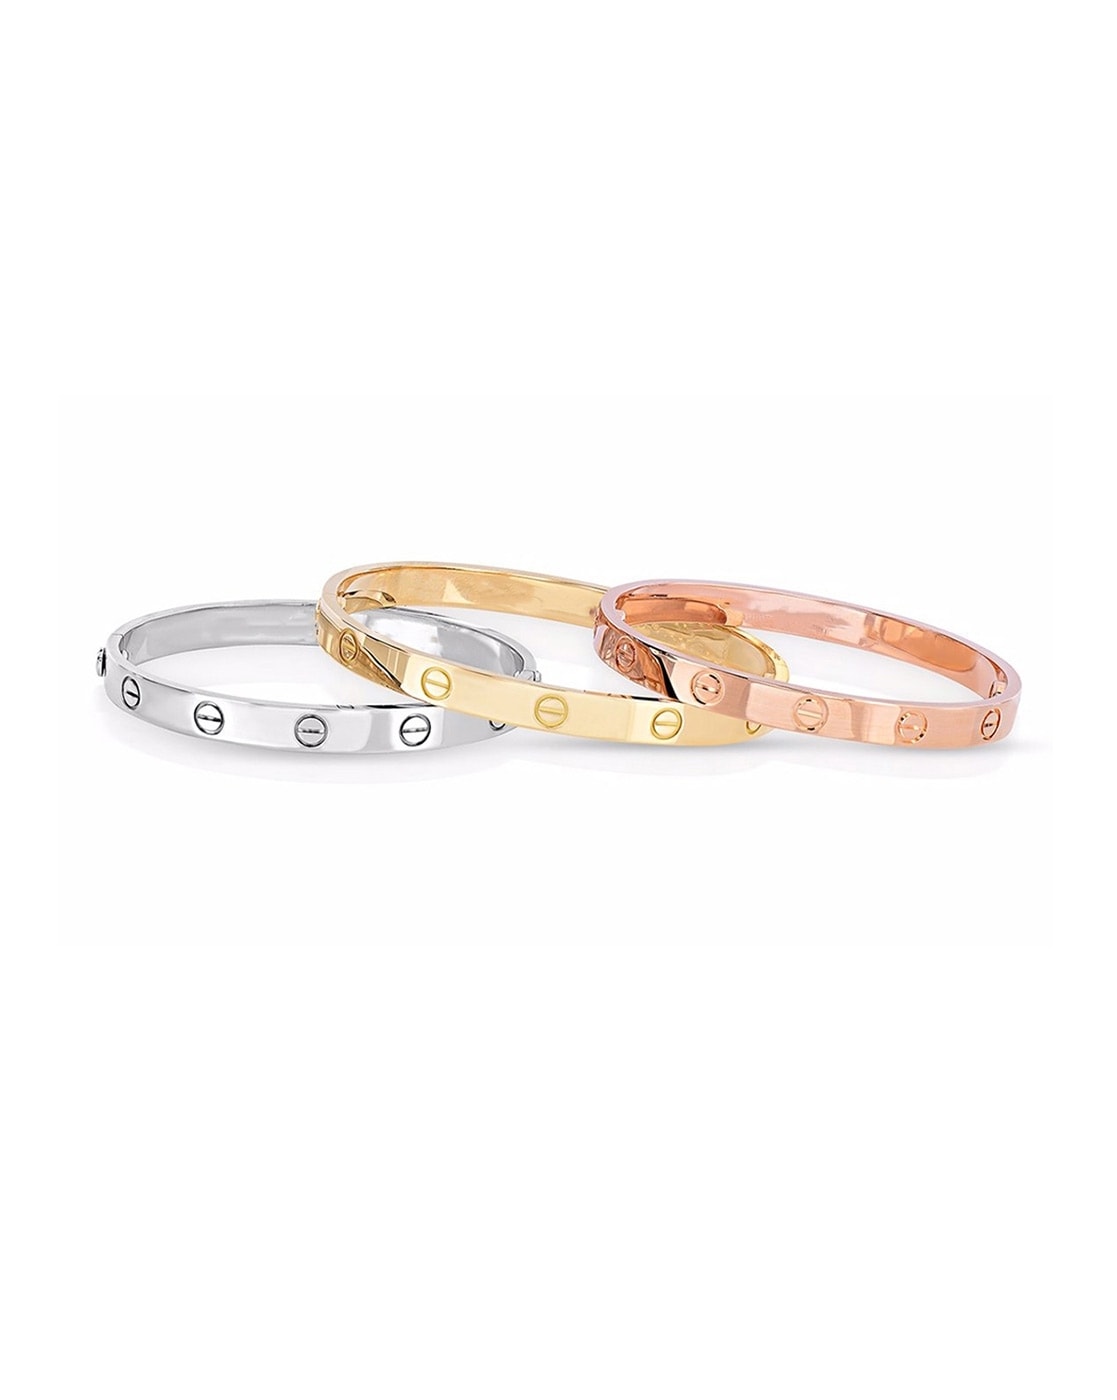 Jewels Galaxy Bangle Bracelets and Cuffs  Buy Jewels Galaxy Jewellery For  Women Contemporary Rose Gold Plated Love Bracelet Online  Nykaa Fashion